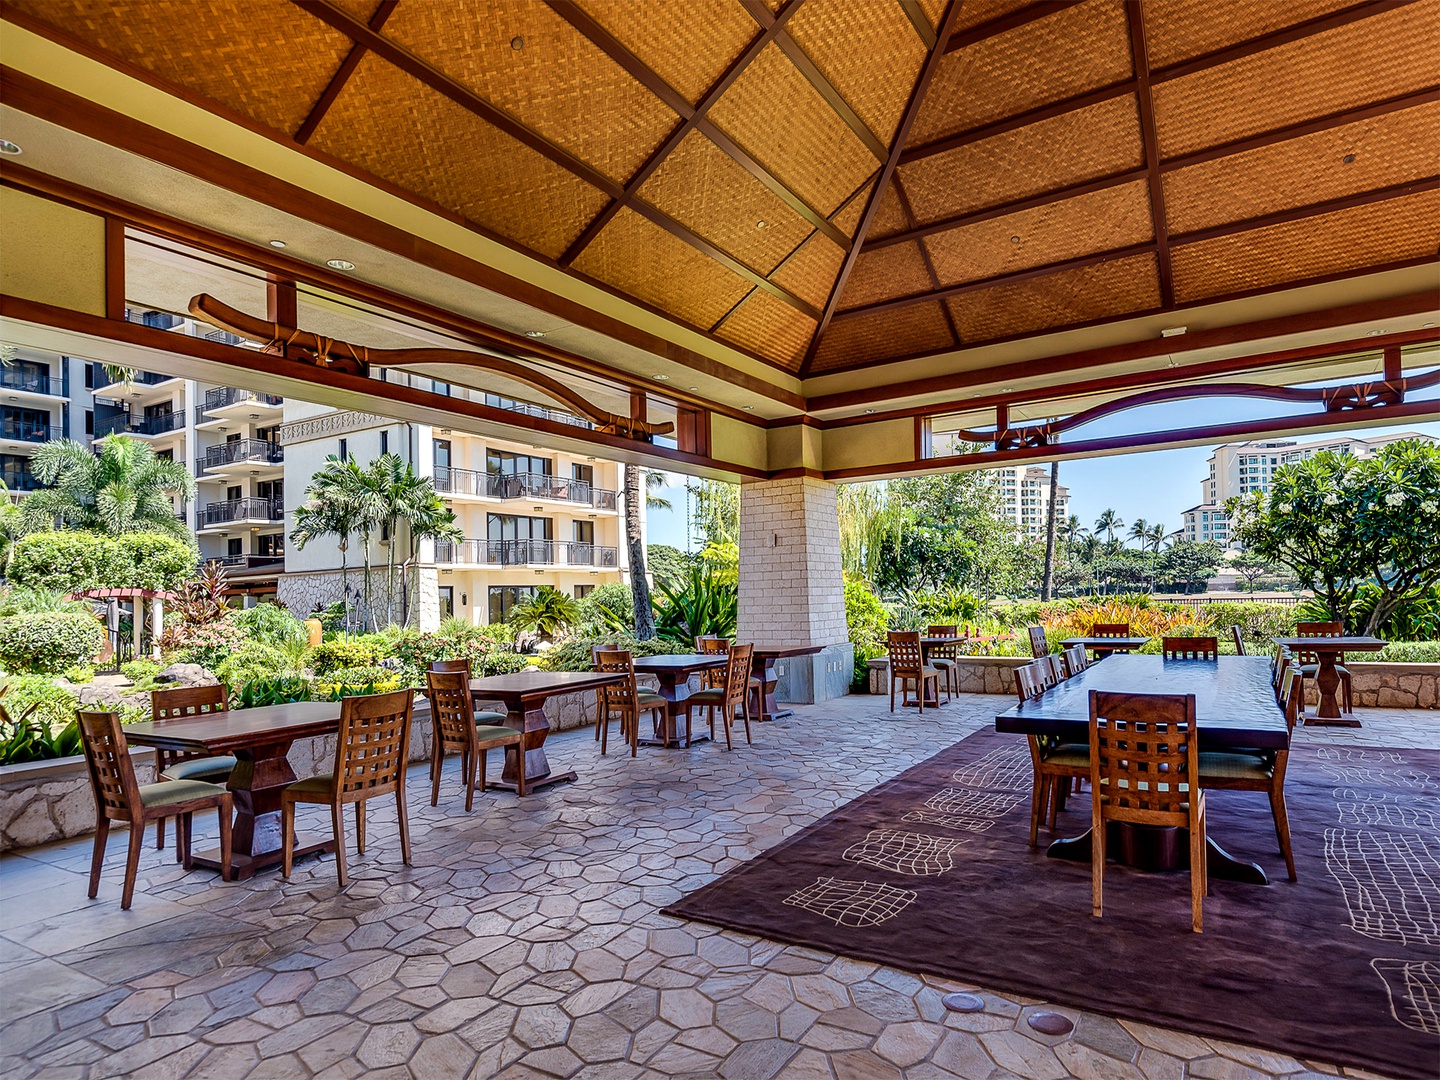 Kapolei Vacation Rentals, Ko Olina Beach Villas O1004 - A lounge area for dining and open air views.